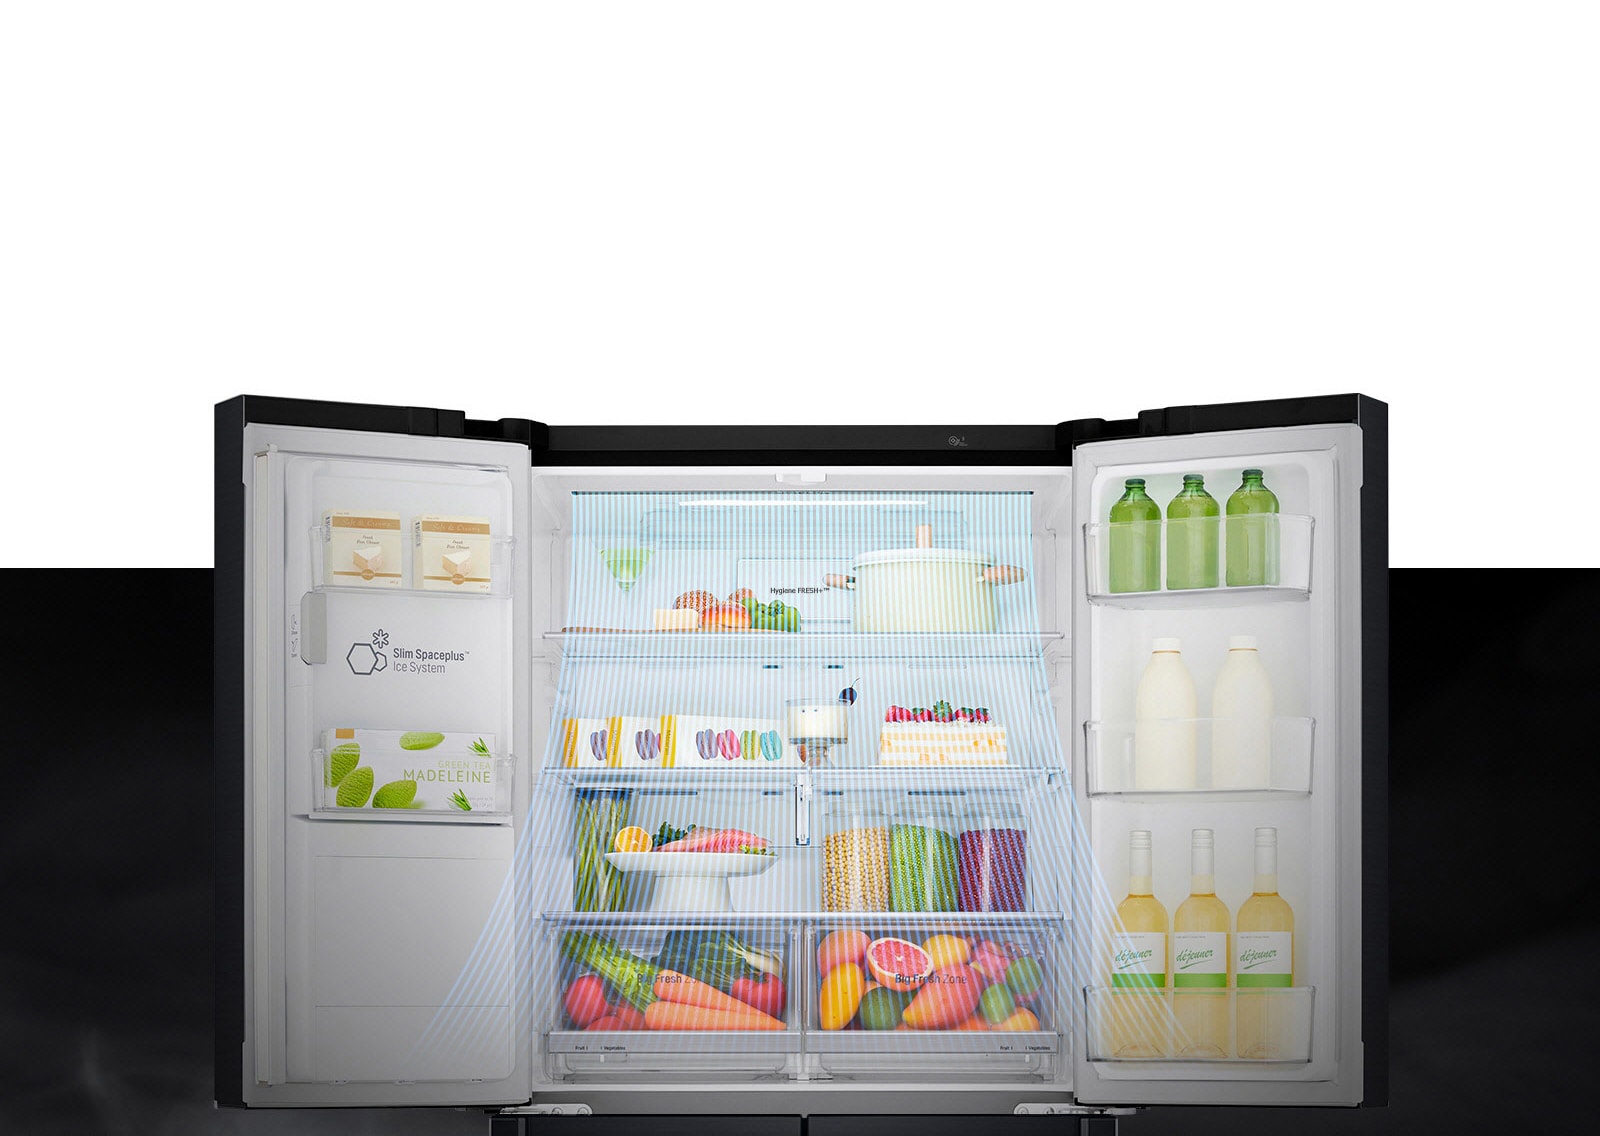 lg french door fridge helps maintain temperature to keep your food items fresh.